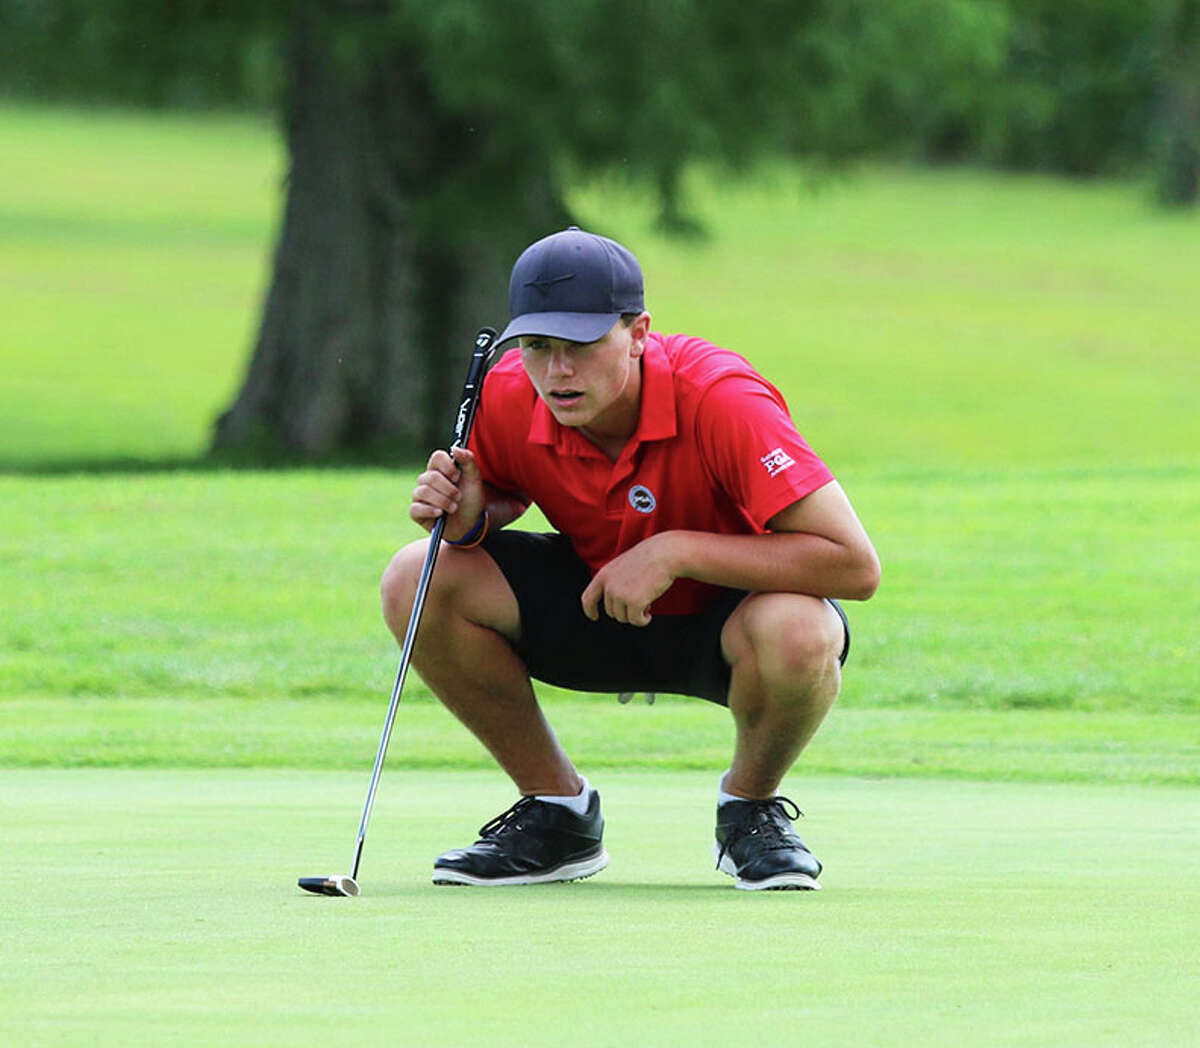 Alton's Sam Ottwell, shown lining up a putt in the Madison County Tourney in Augusta at Belk Park, was runner-up Wednesday at the Quincy Class 3A Regional to help the Redbirds finish third and advance as a team to the sectional for the first time since 20001.